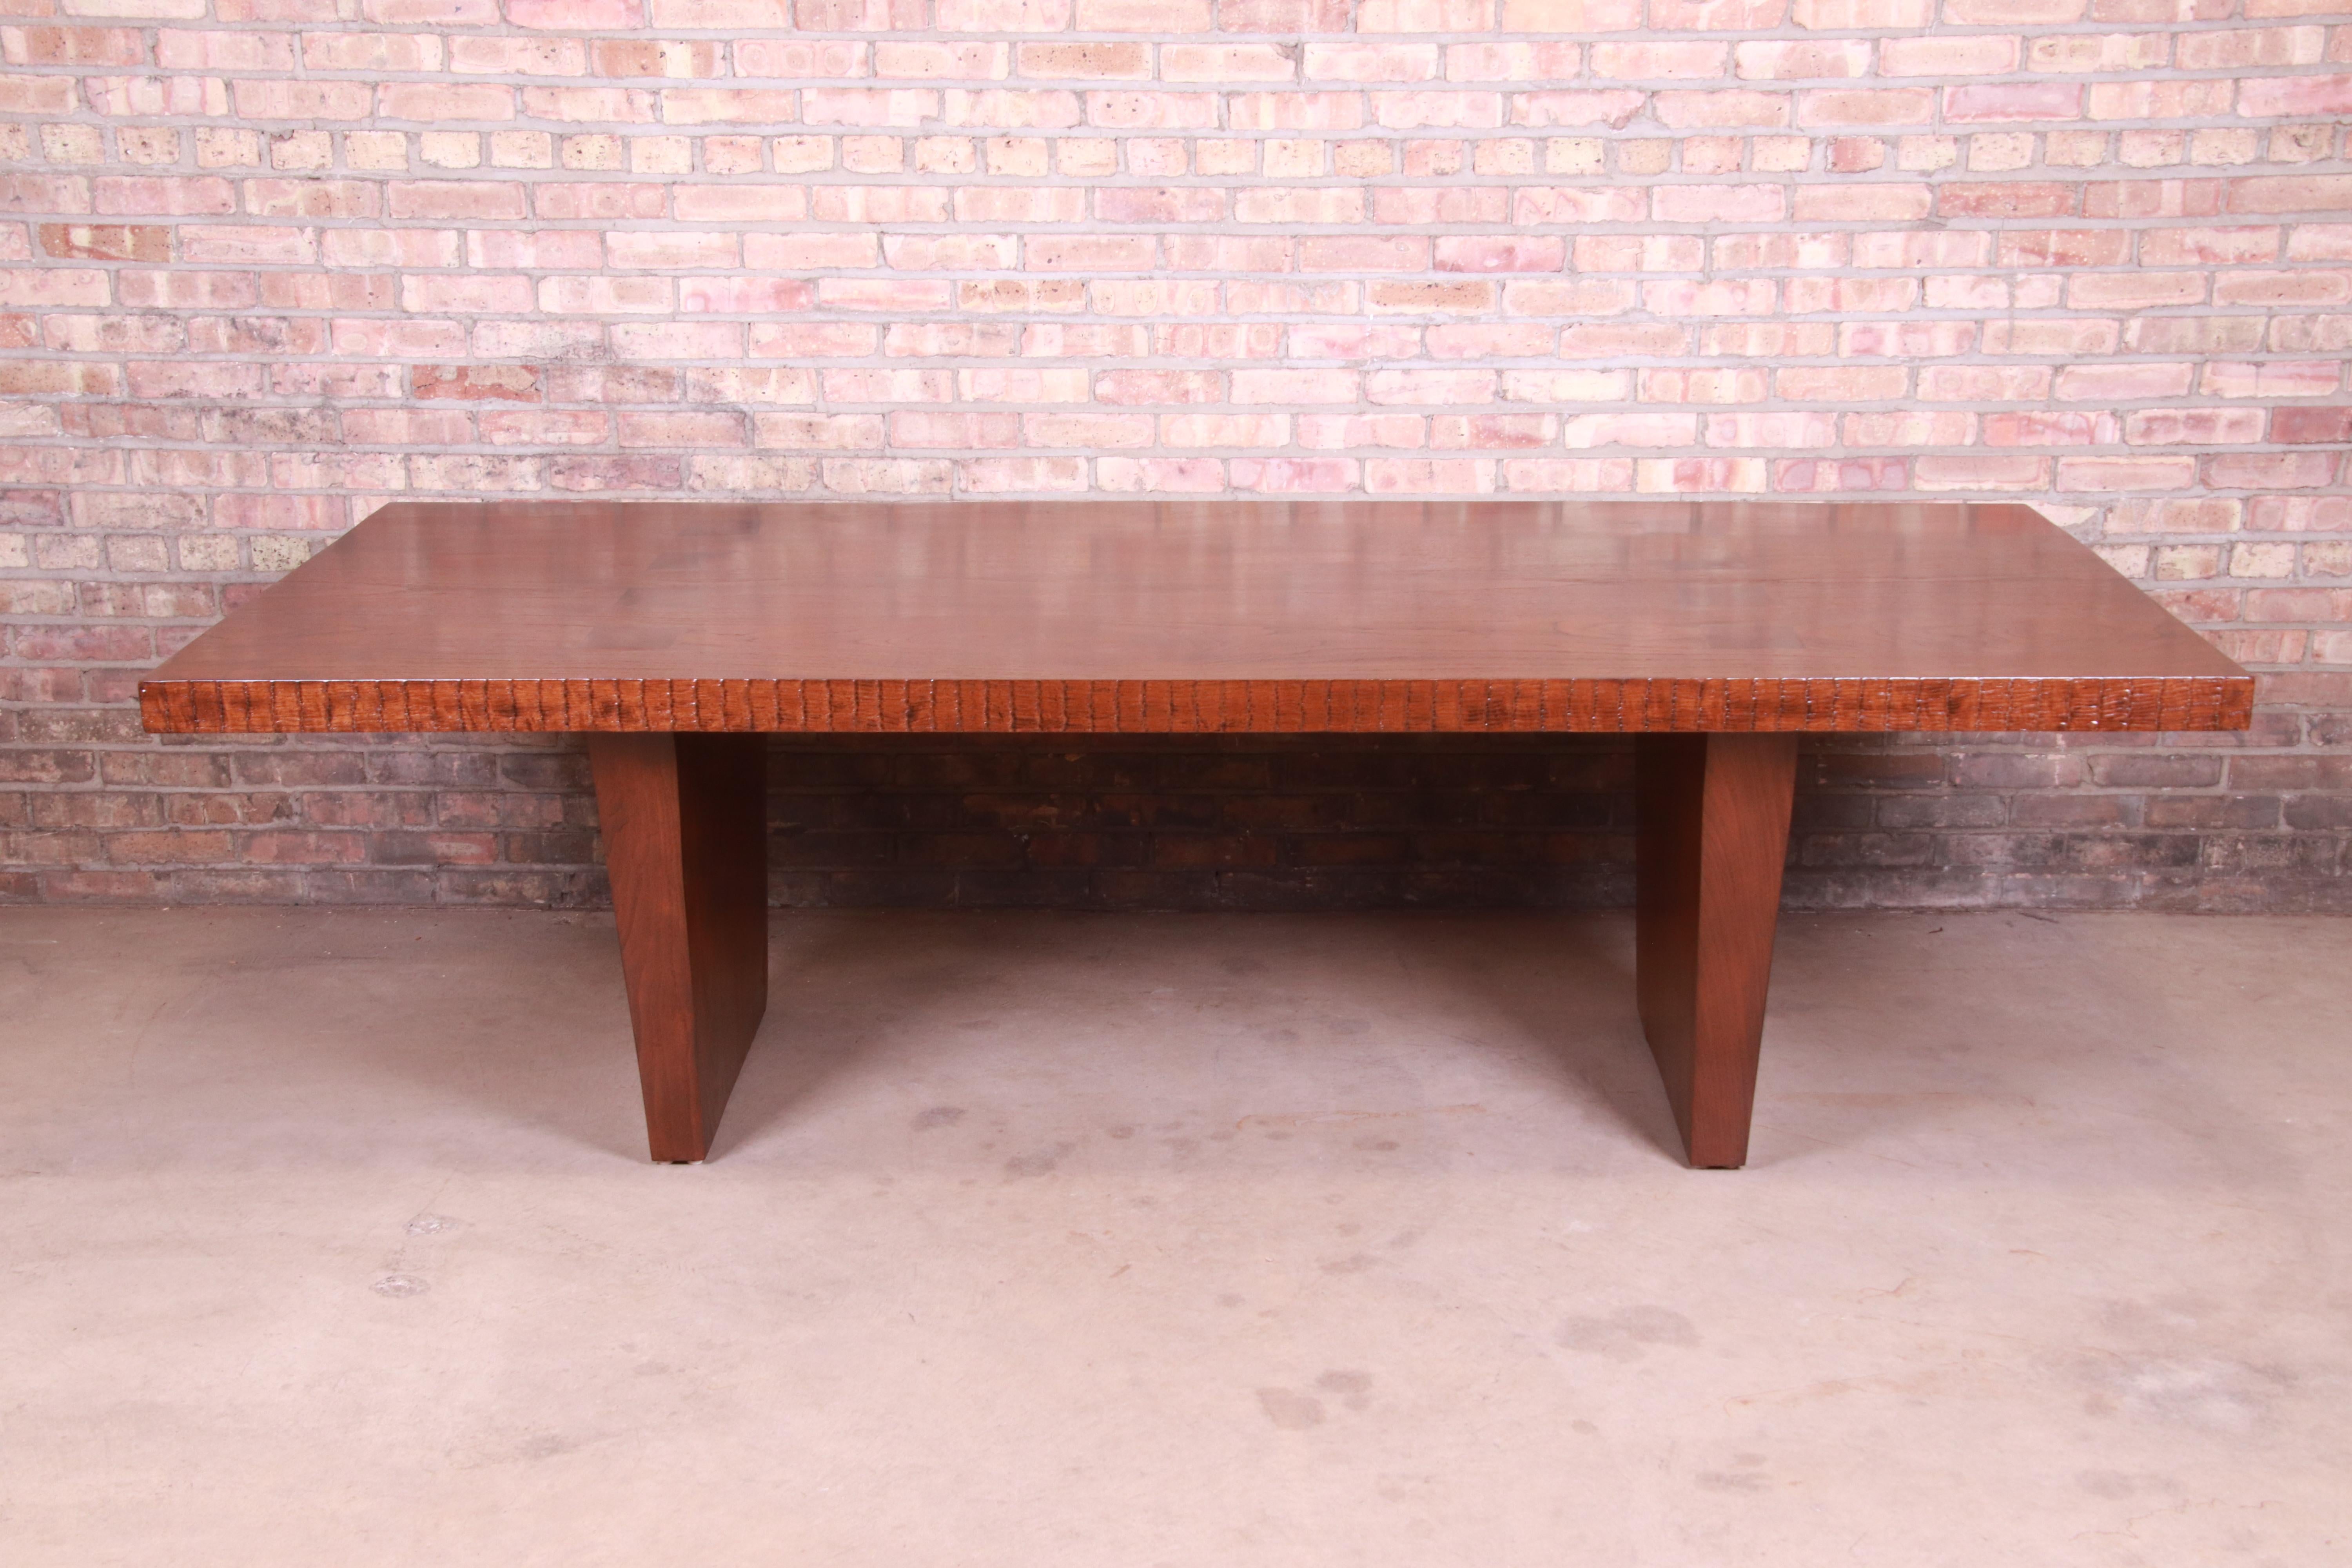 An exceptional organic modern studio craft dining table or executive writing desk

In the manner of George Nakashima

USA, 20th century

Thick solid walnut slabs, with exposed mortise and tenon joints. One side with textured live